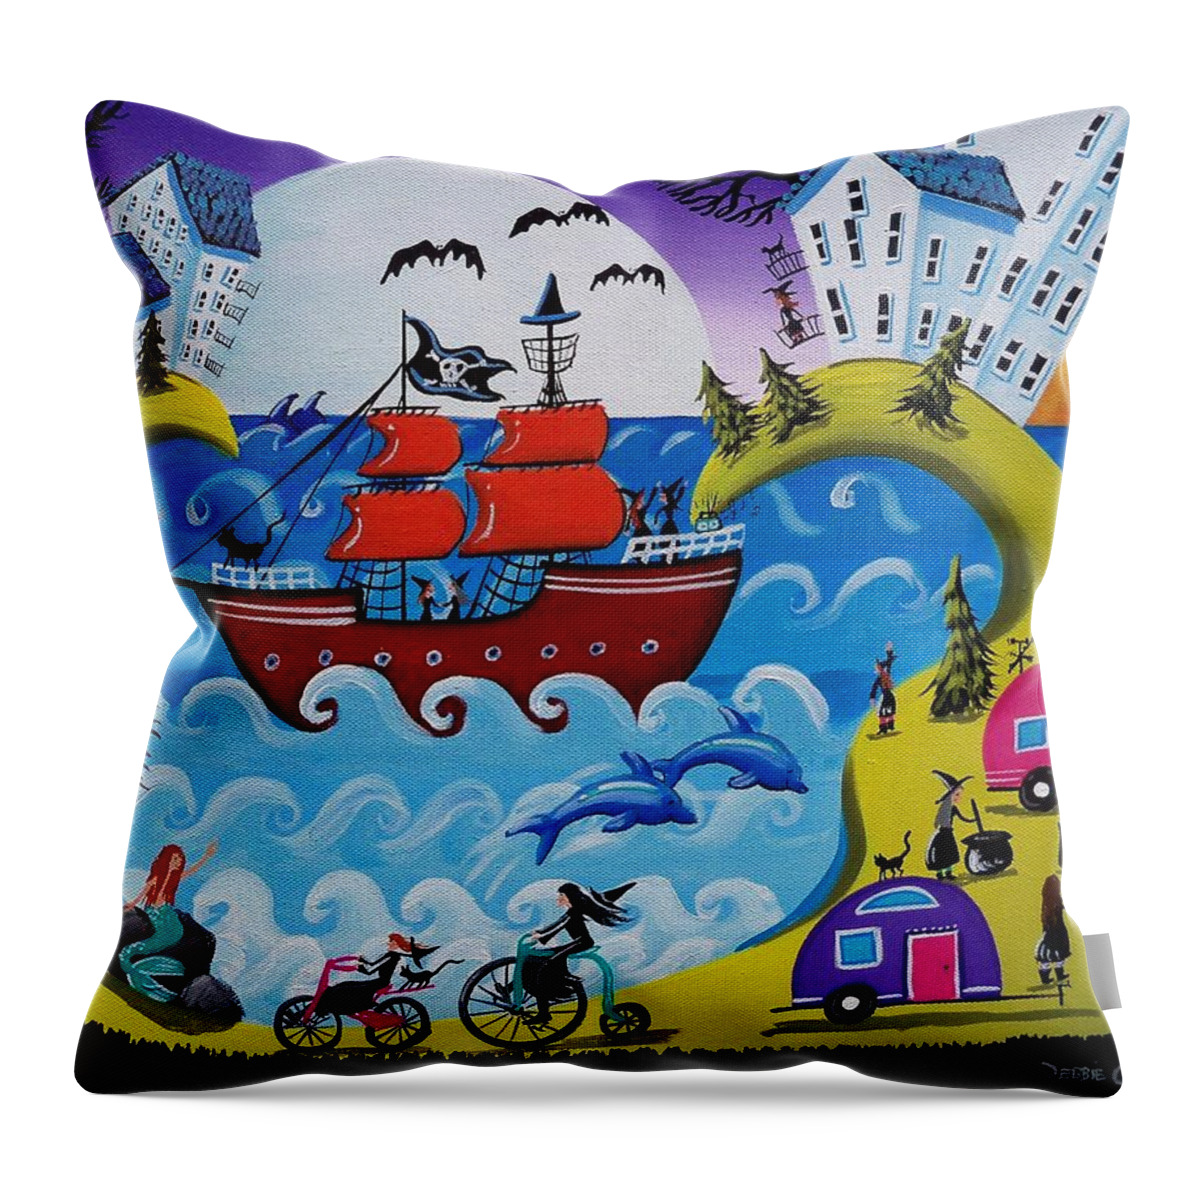 Pirate Throw Pillow featuring the painting Witches By The Sea by Debbie Criswell